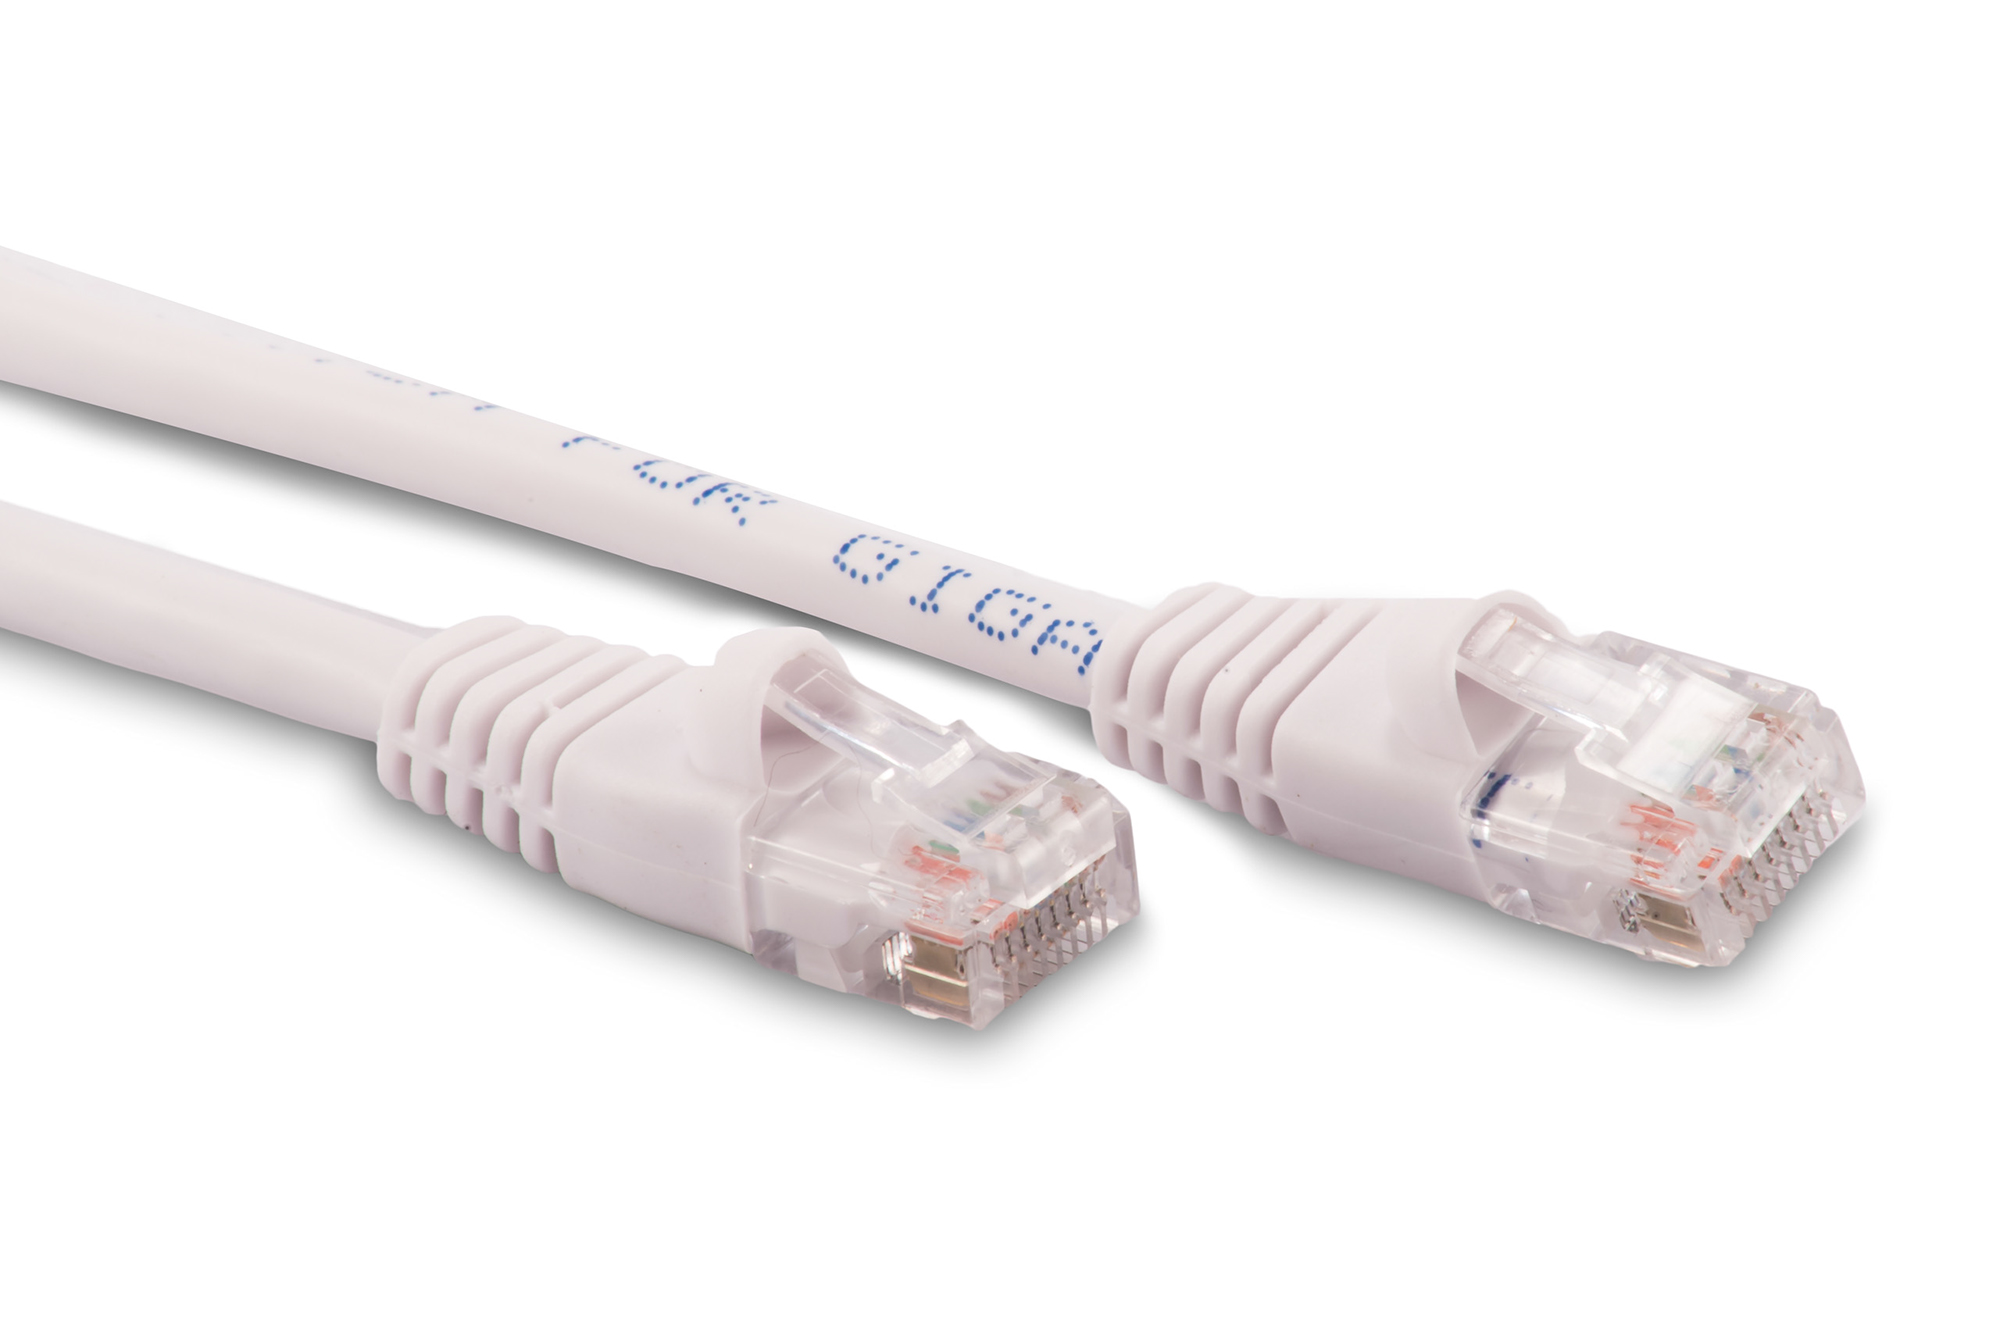 12ft Cat5e Ethernet Patch Cable - White Color - Snagless Boot